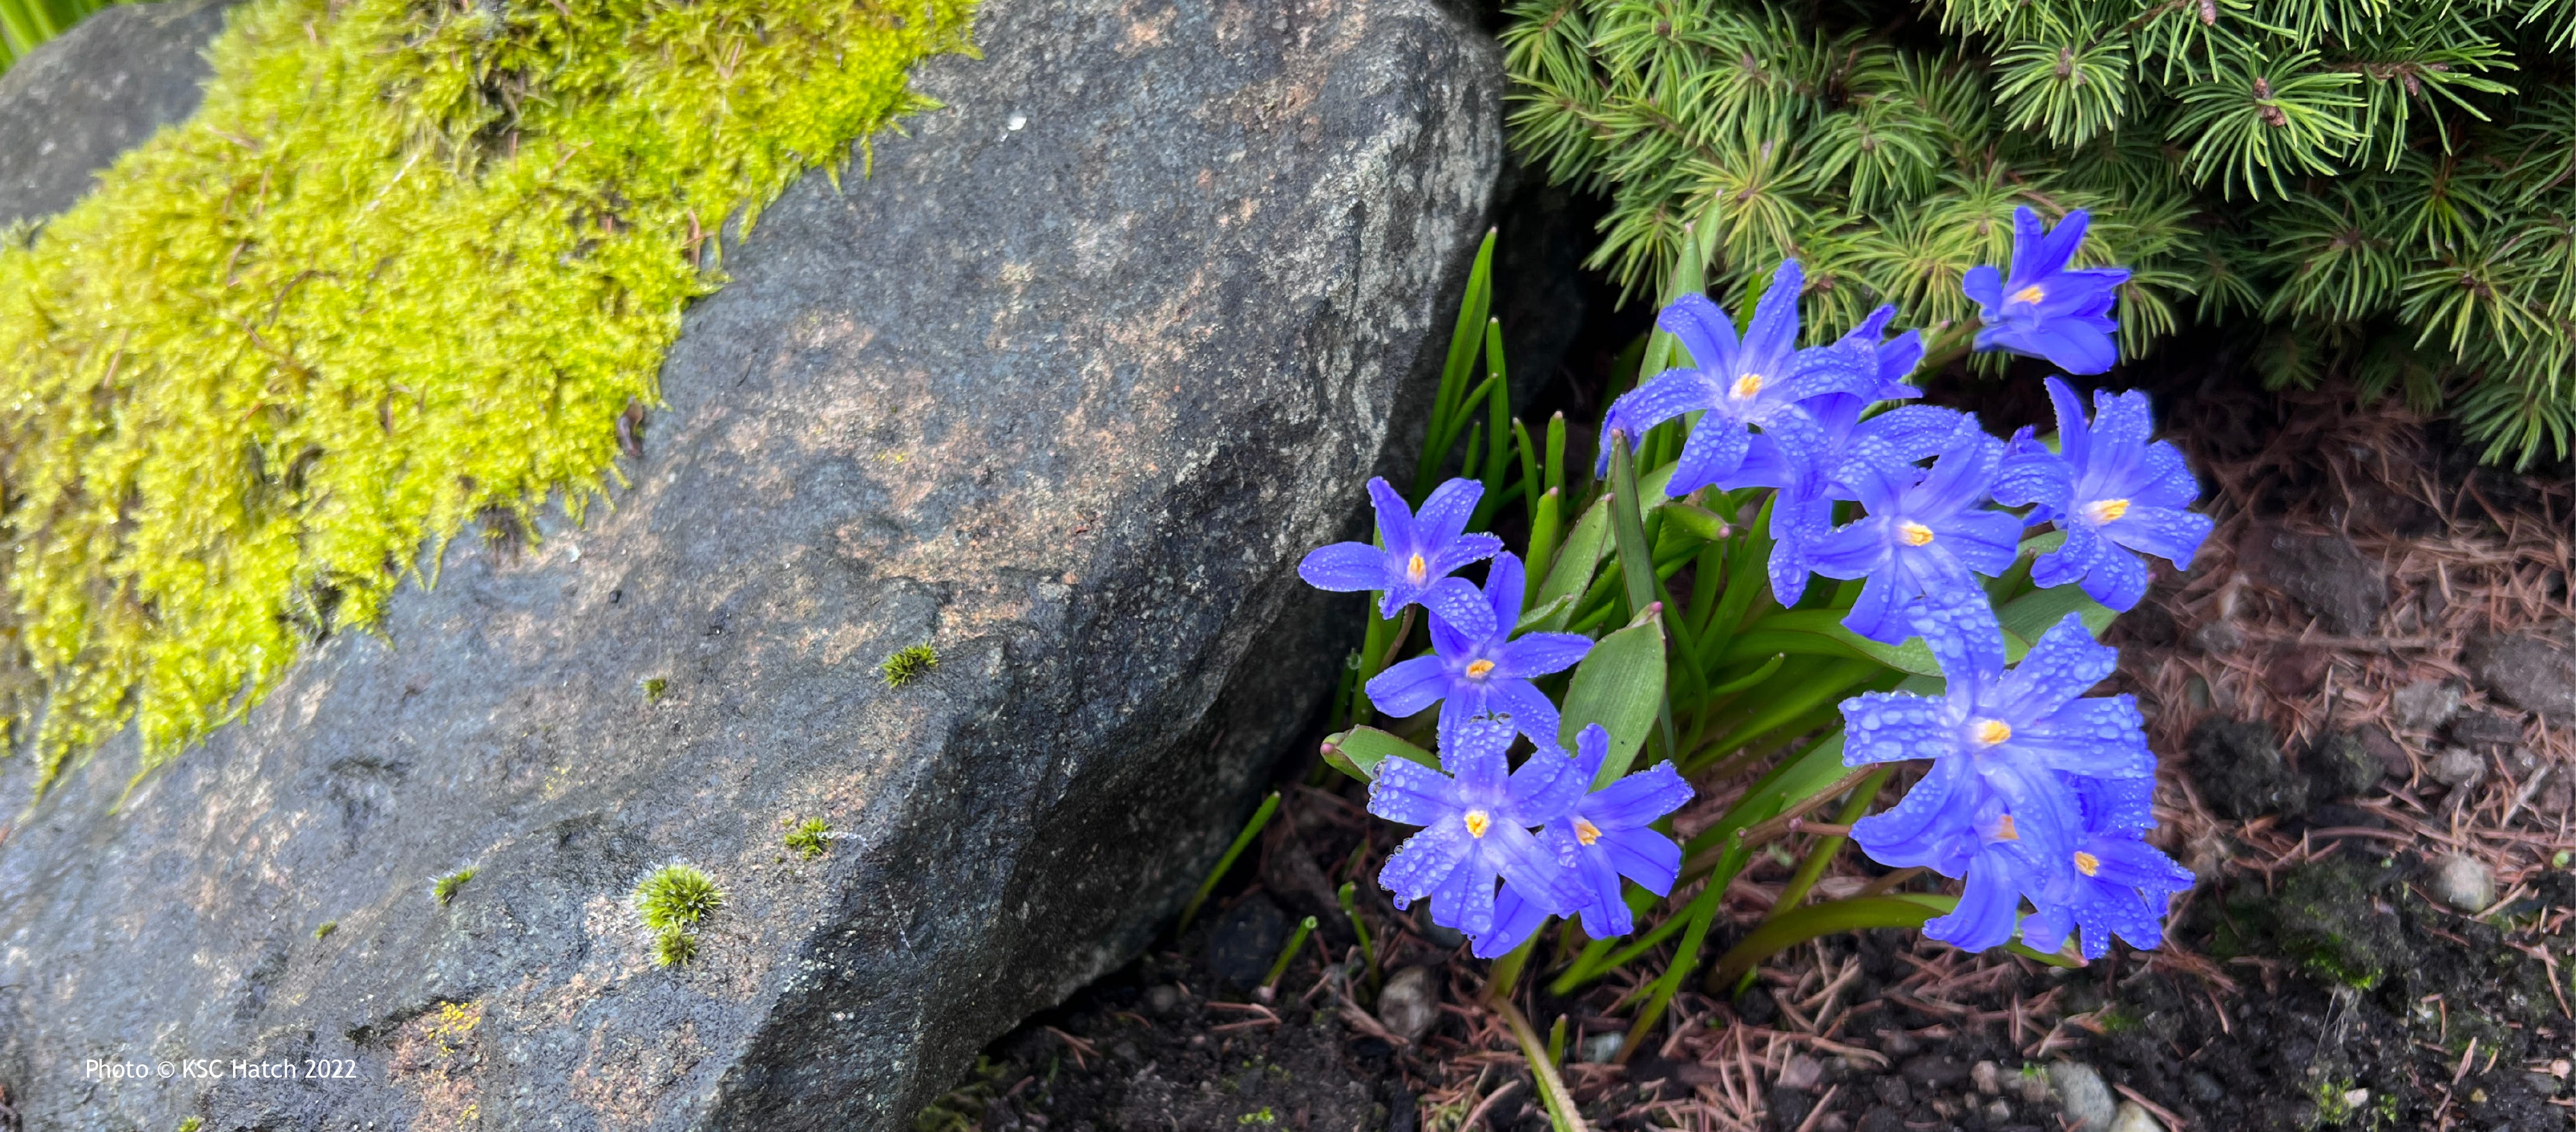 Photo of some bright blue flowers growing next to a moss covered rock. The florwers are covered in little dew drops and the ground beneath them is scattered with brown pine needles. 